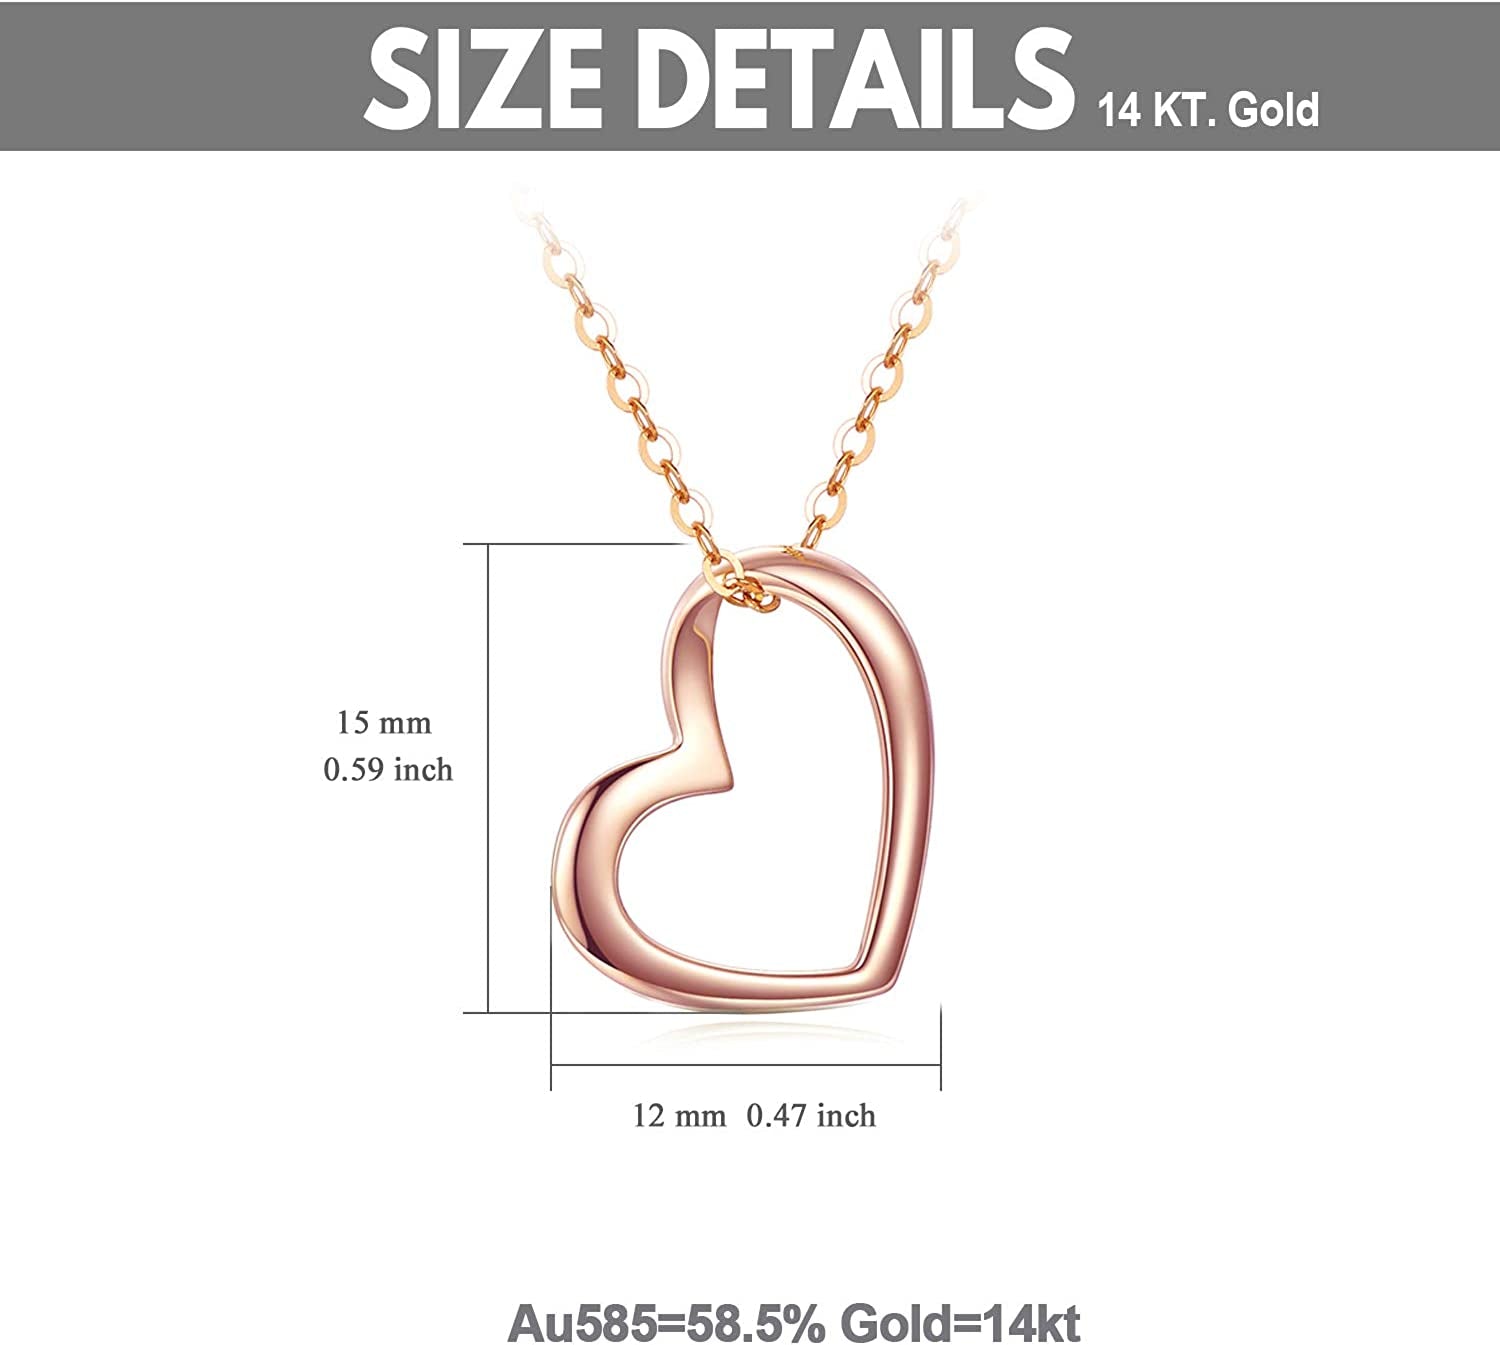 Solid 14K Gold Heart Necklace for Women, Fine Gold Love Jewelry Gifts for Wife/Mother/Girlfriend, Birthday Pesent for Her, 16+2 Inch